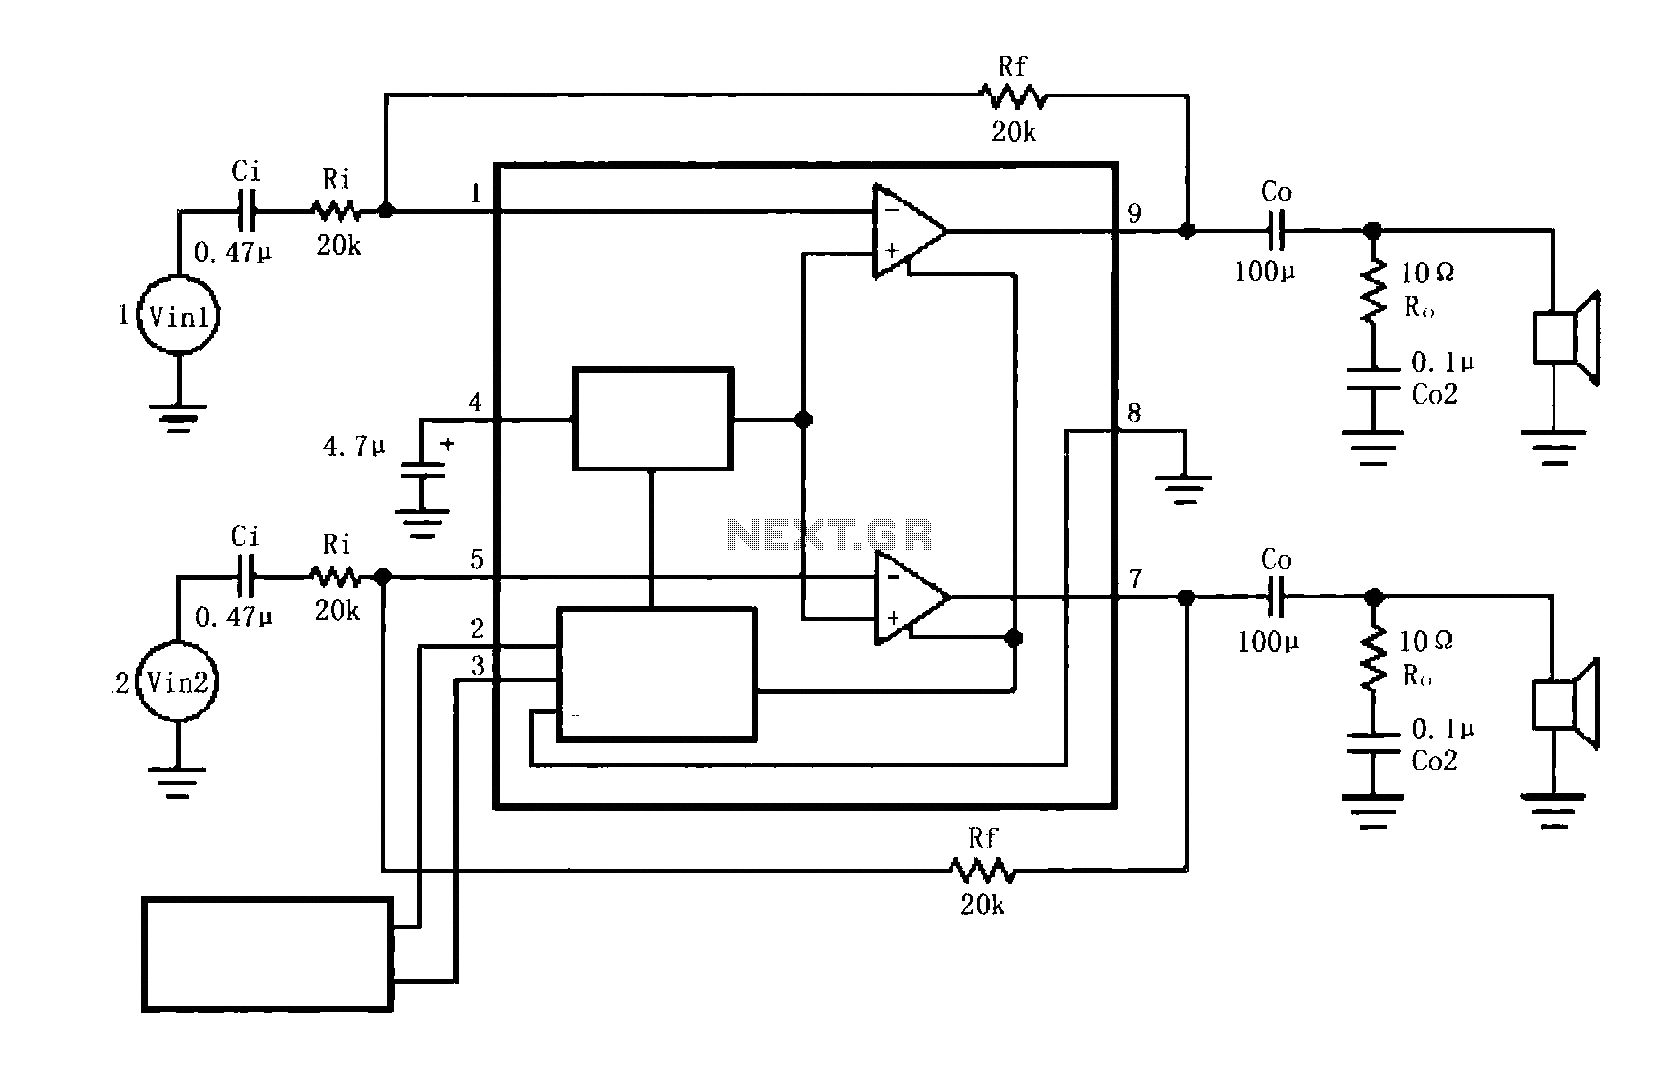 A typical circuit for the LM4916 two-channel amplifier